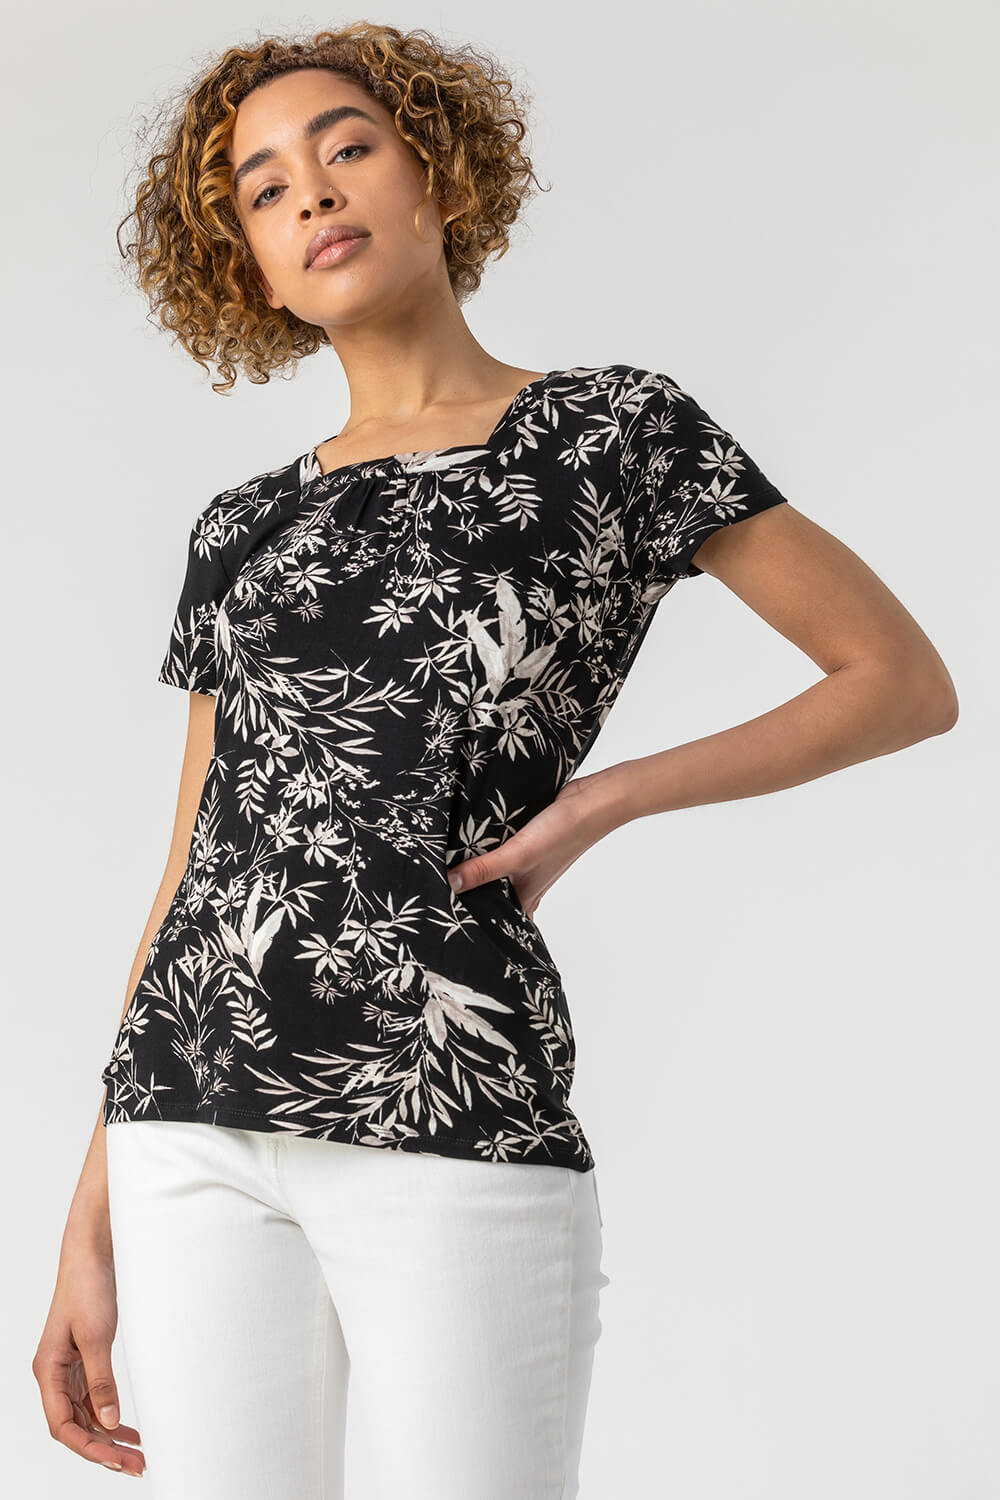 Black Ditsy Floral Square Neck T-Shirt, Image 2 of 5